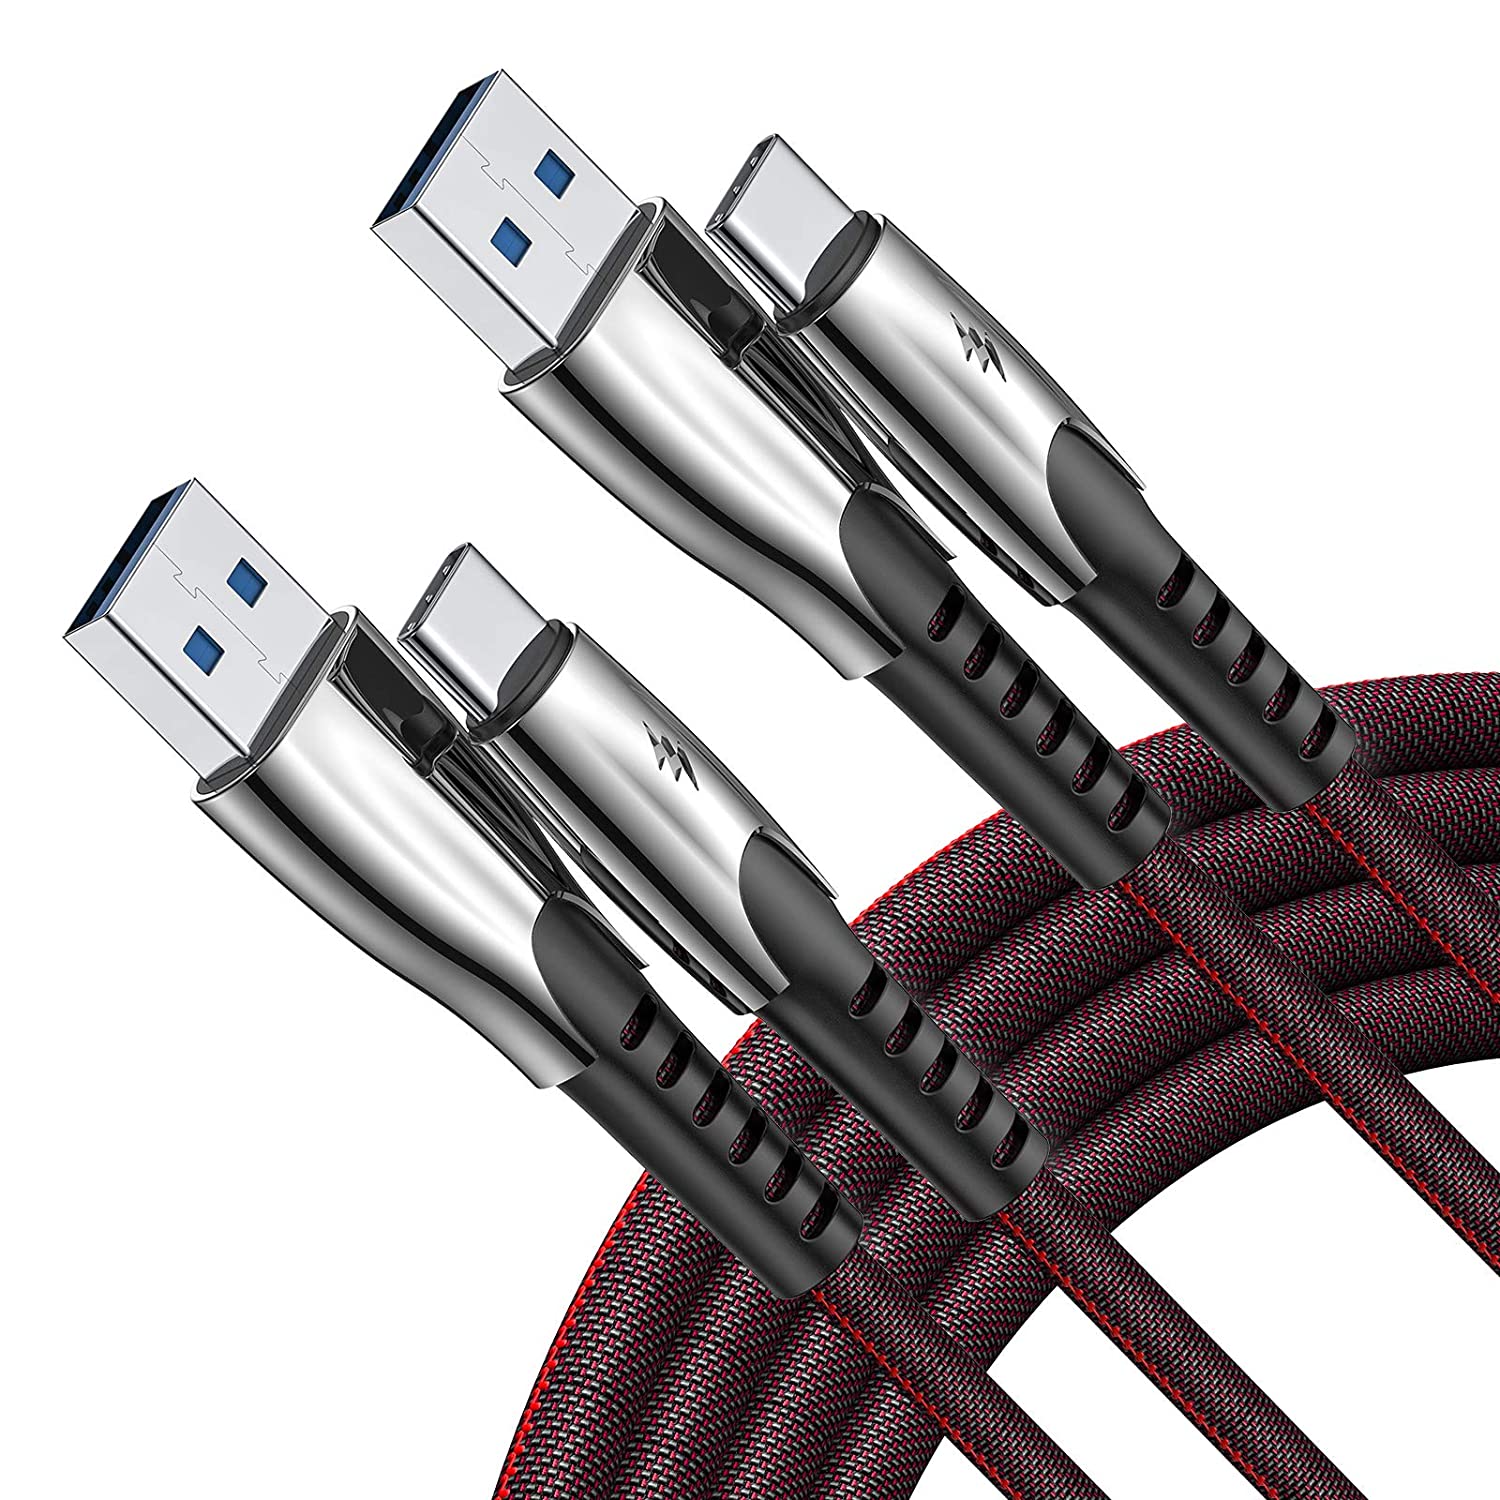 AINOPE USB Type C Cable 3.1A Fast Charger (2-Pack, 6ft+6ft) - Red